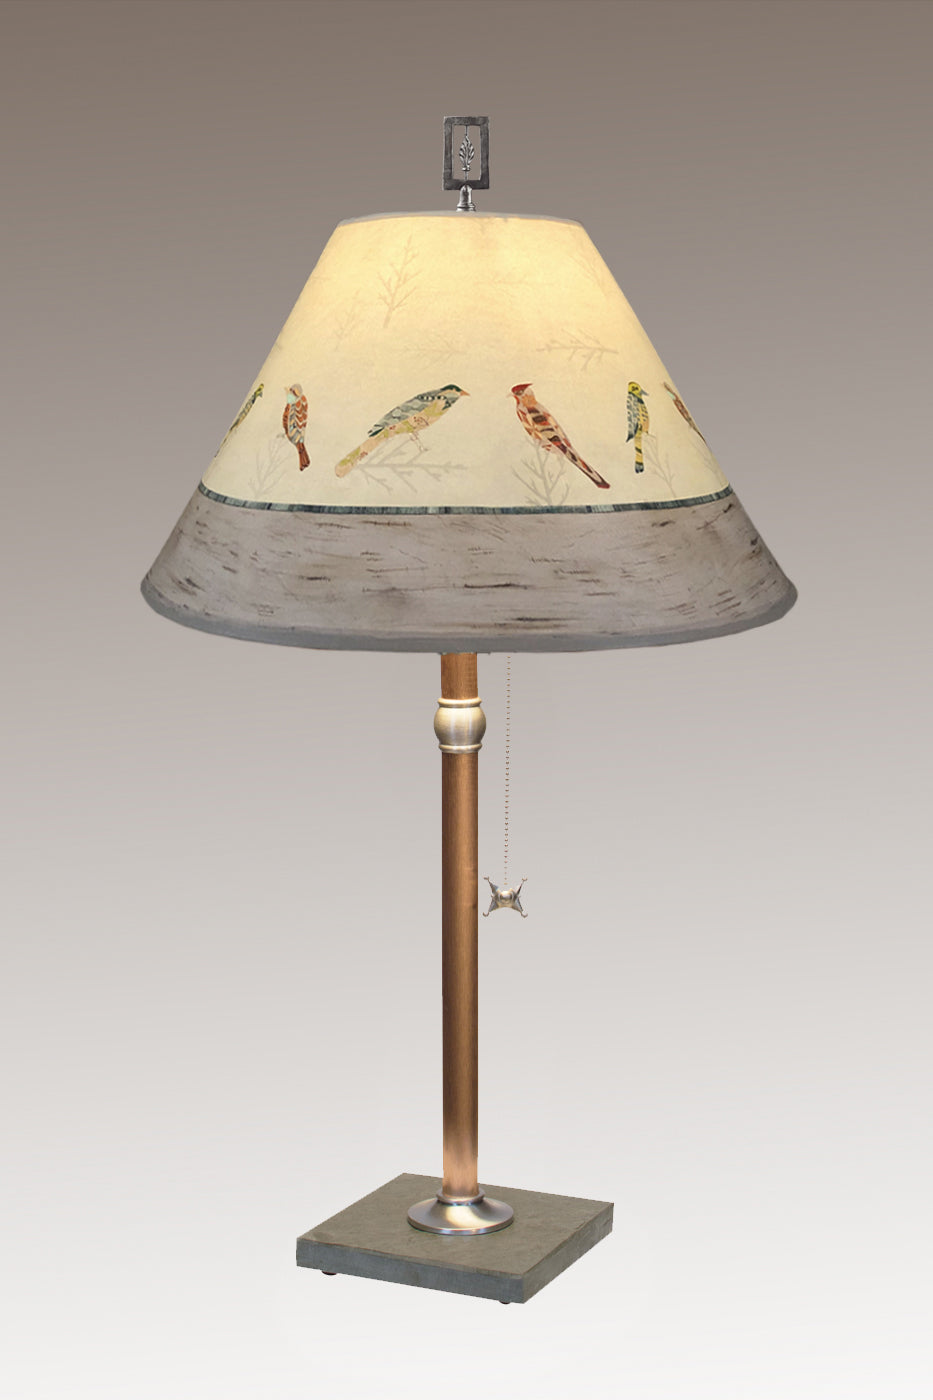 Janna Ugone & Co Table Lamps Copper Table Lamp with Medium Conical Shade in Bird Friends